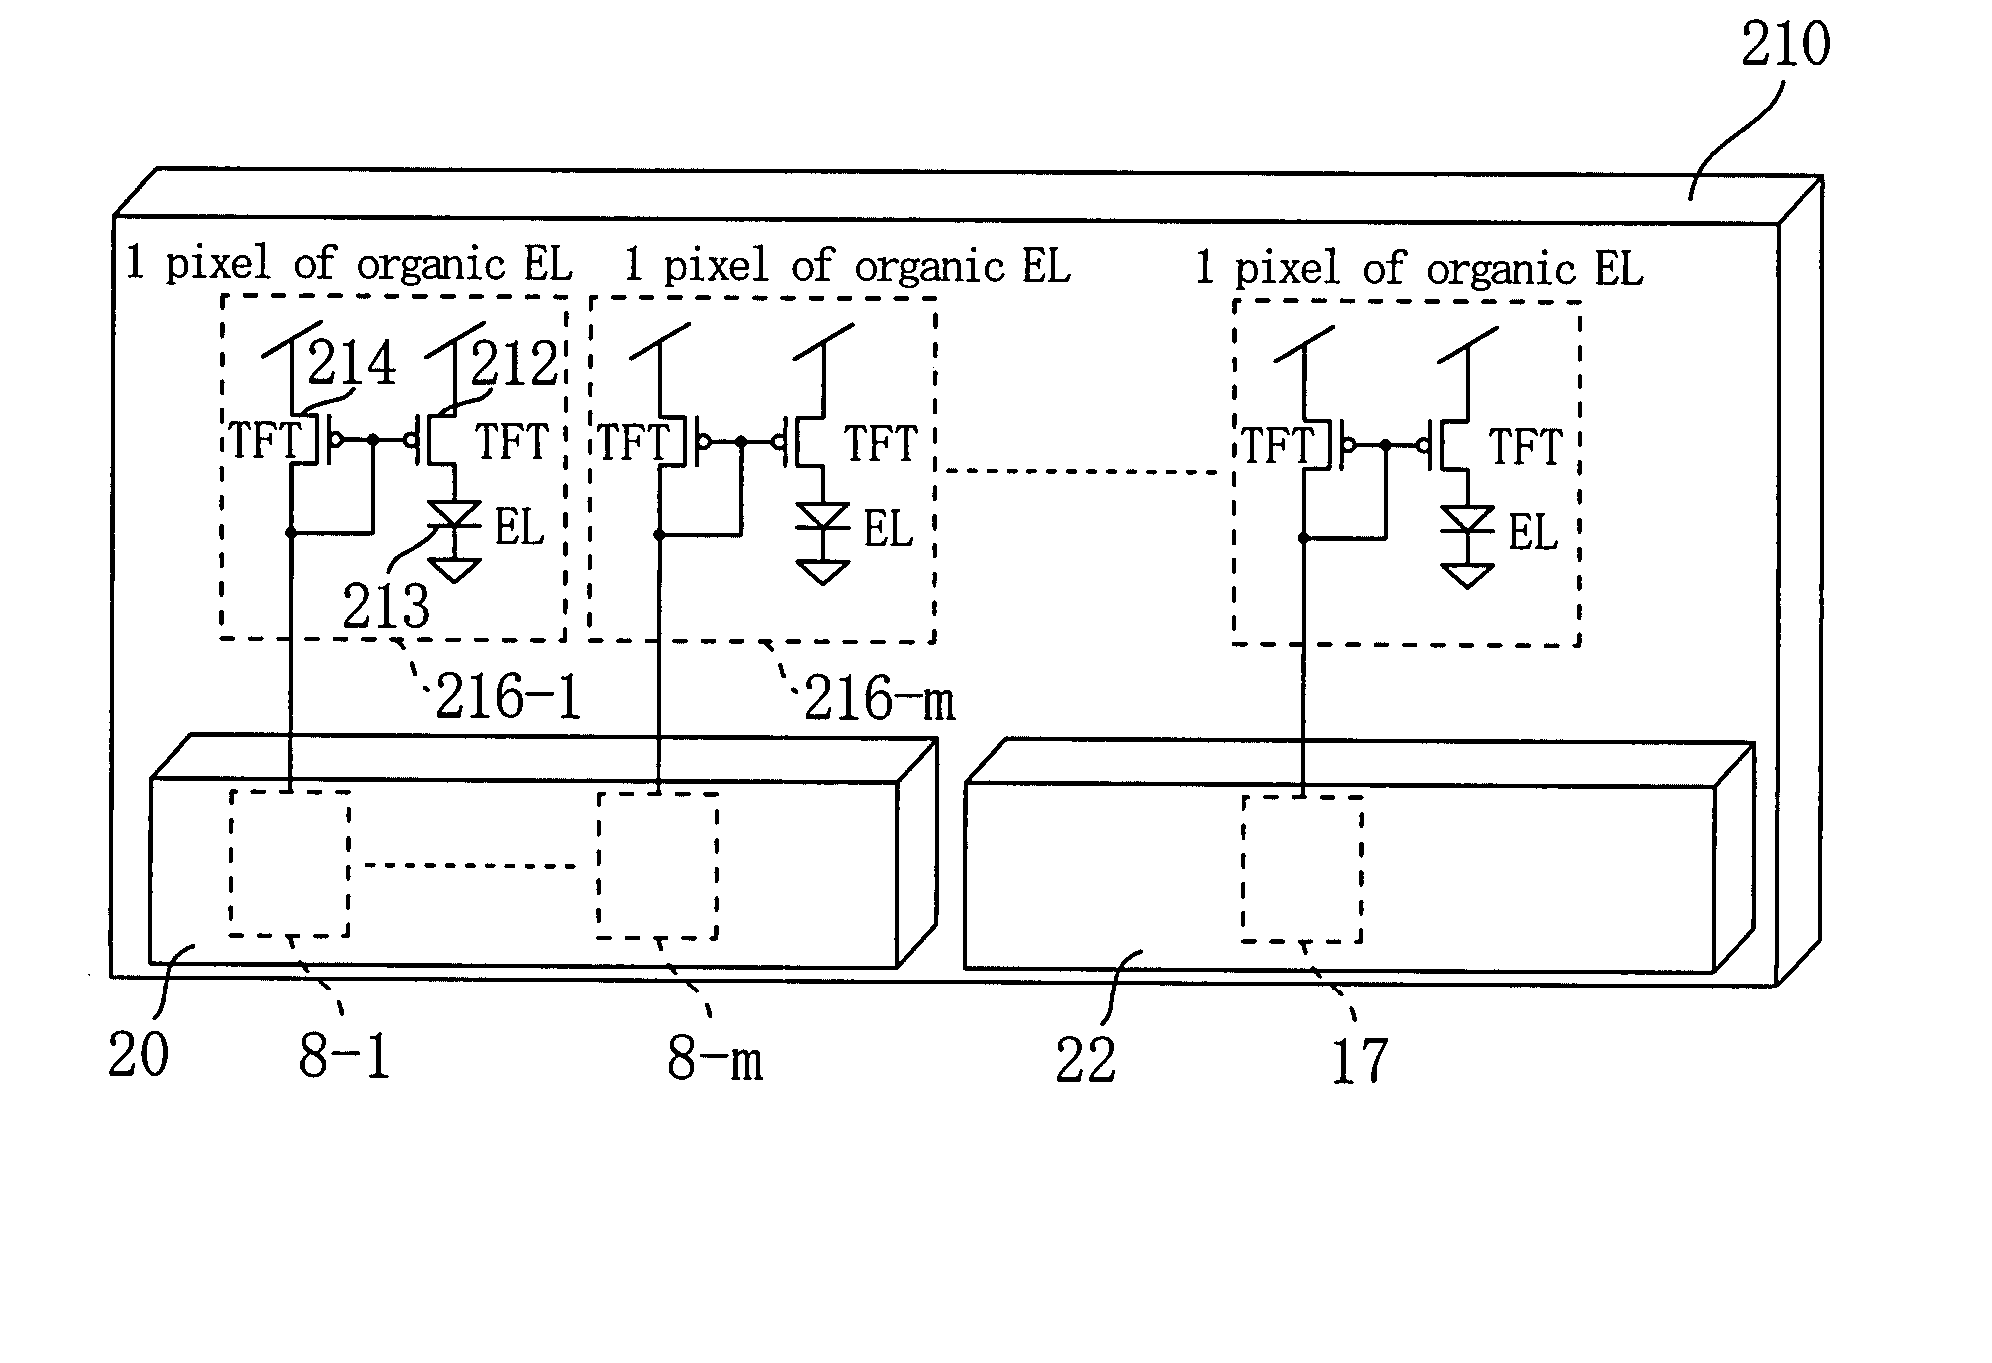 Current driver and display device